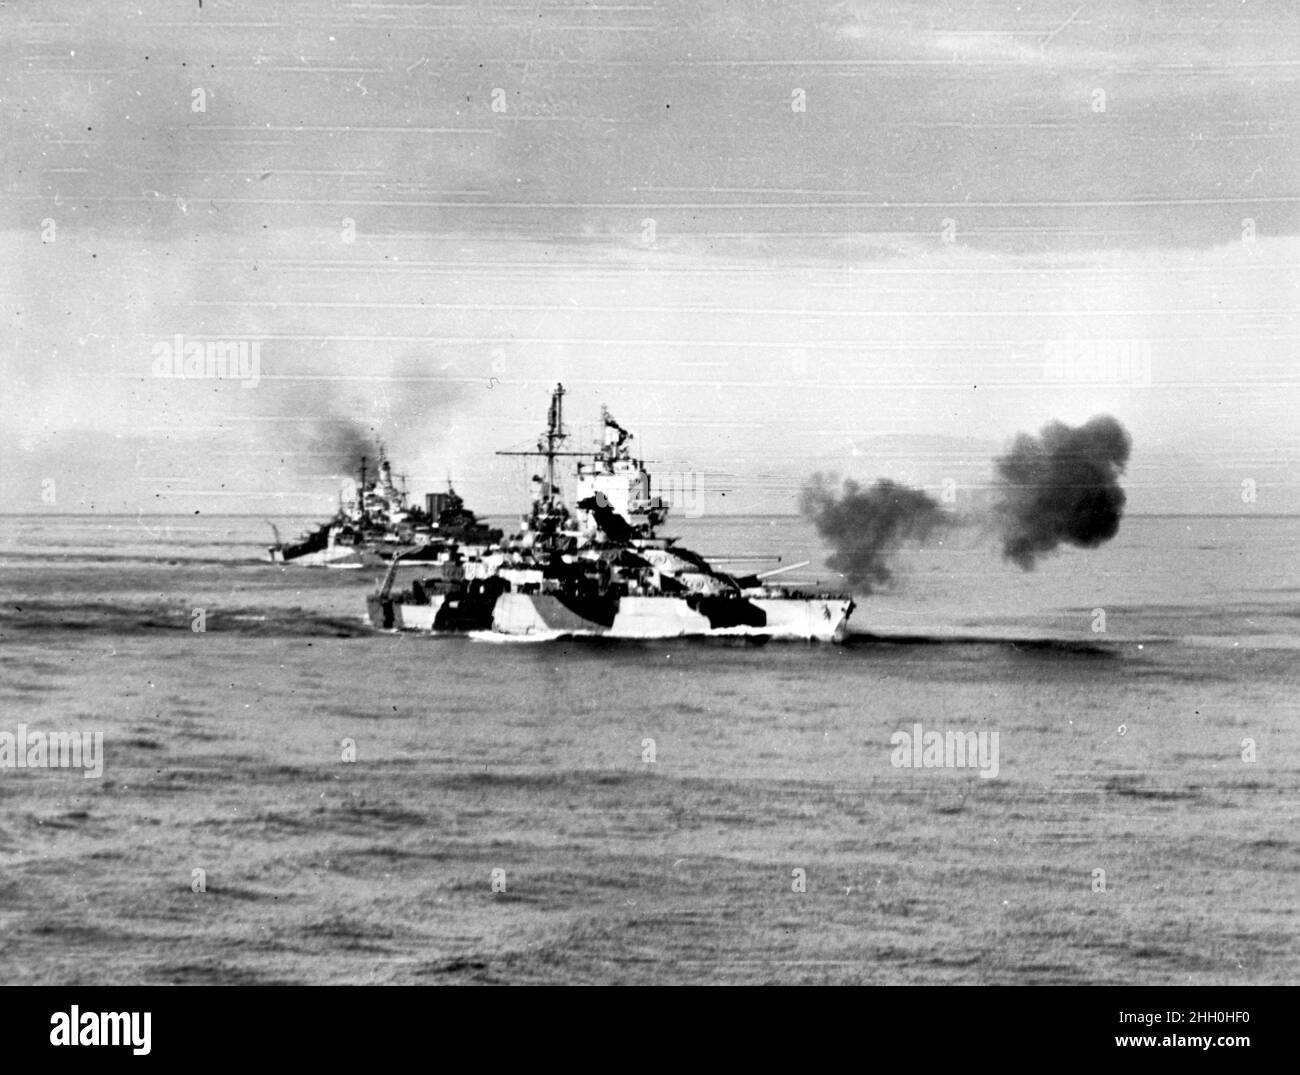 The USS Mississippi firing on the Lingayen Gulf attack and invasion force during the Pacific War in WW2 Stock Photo